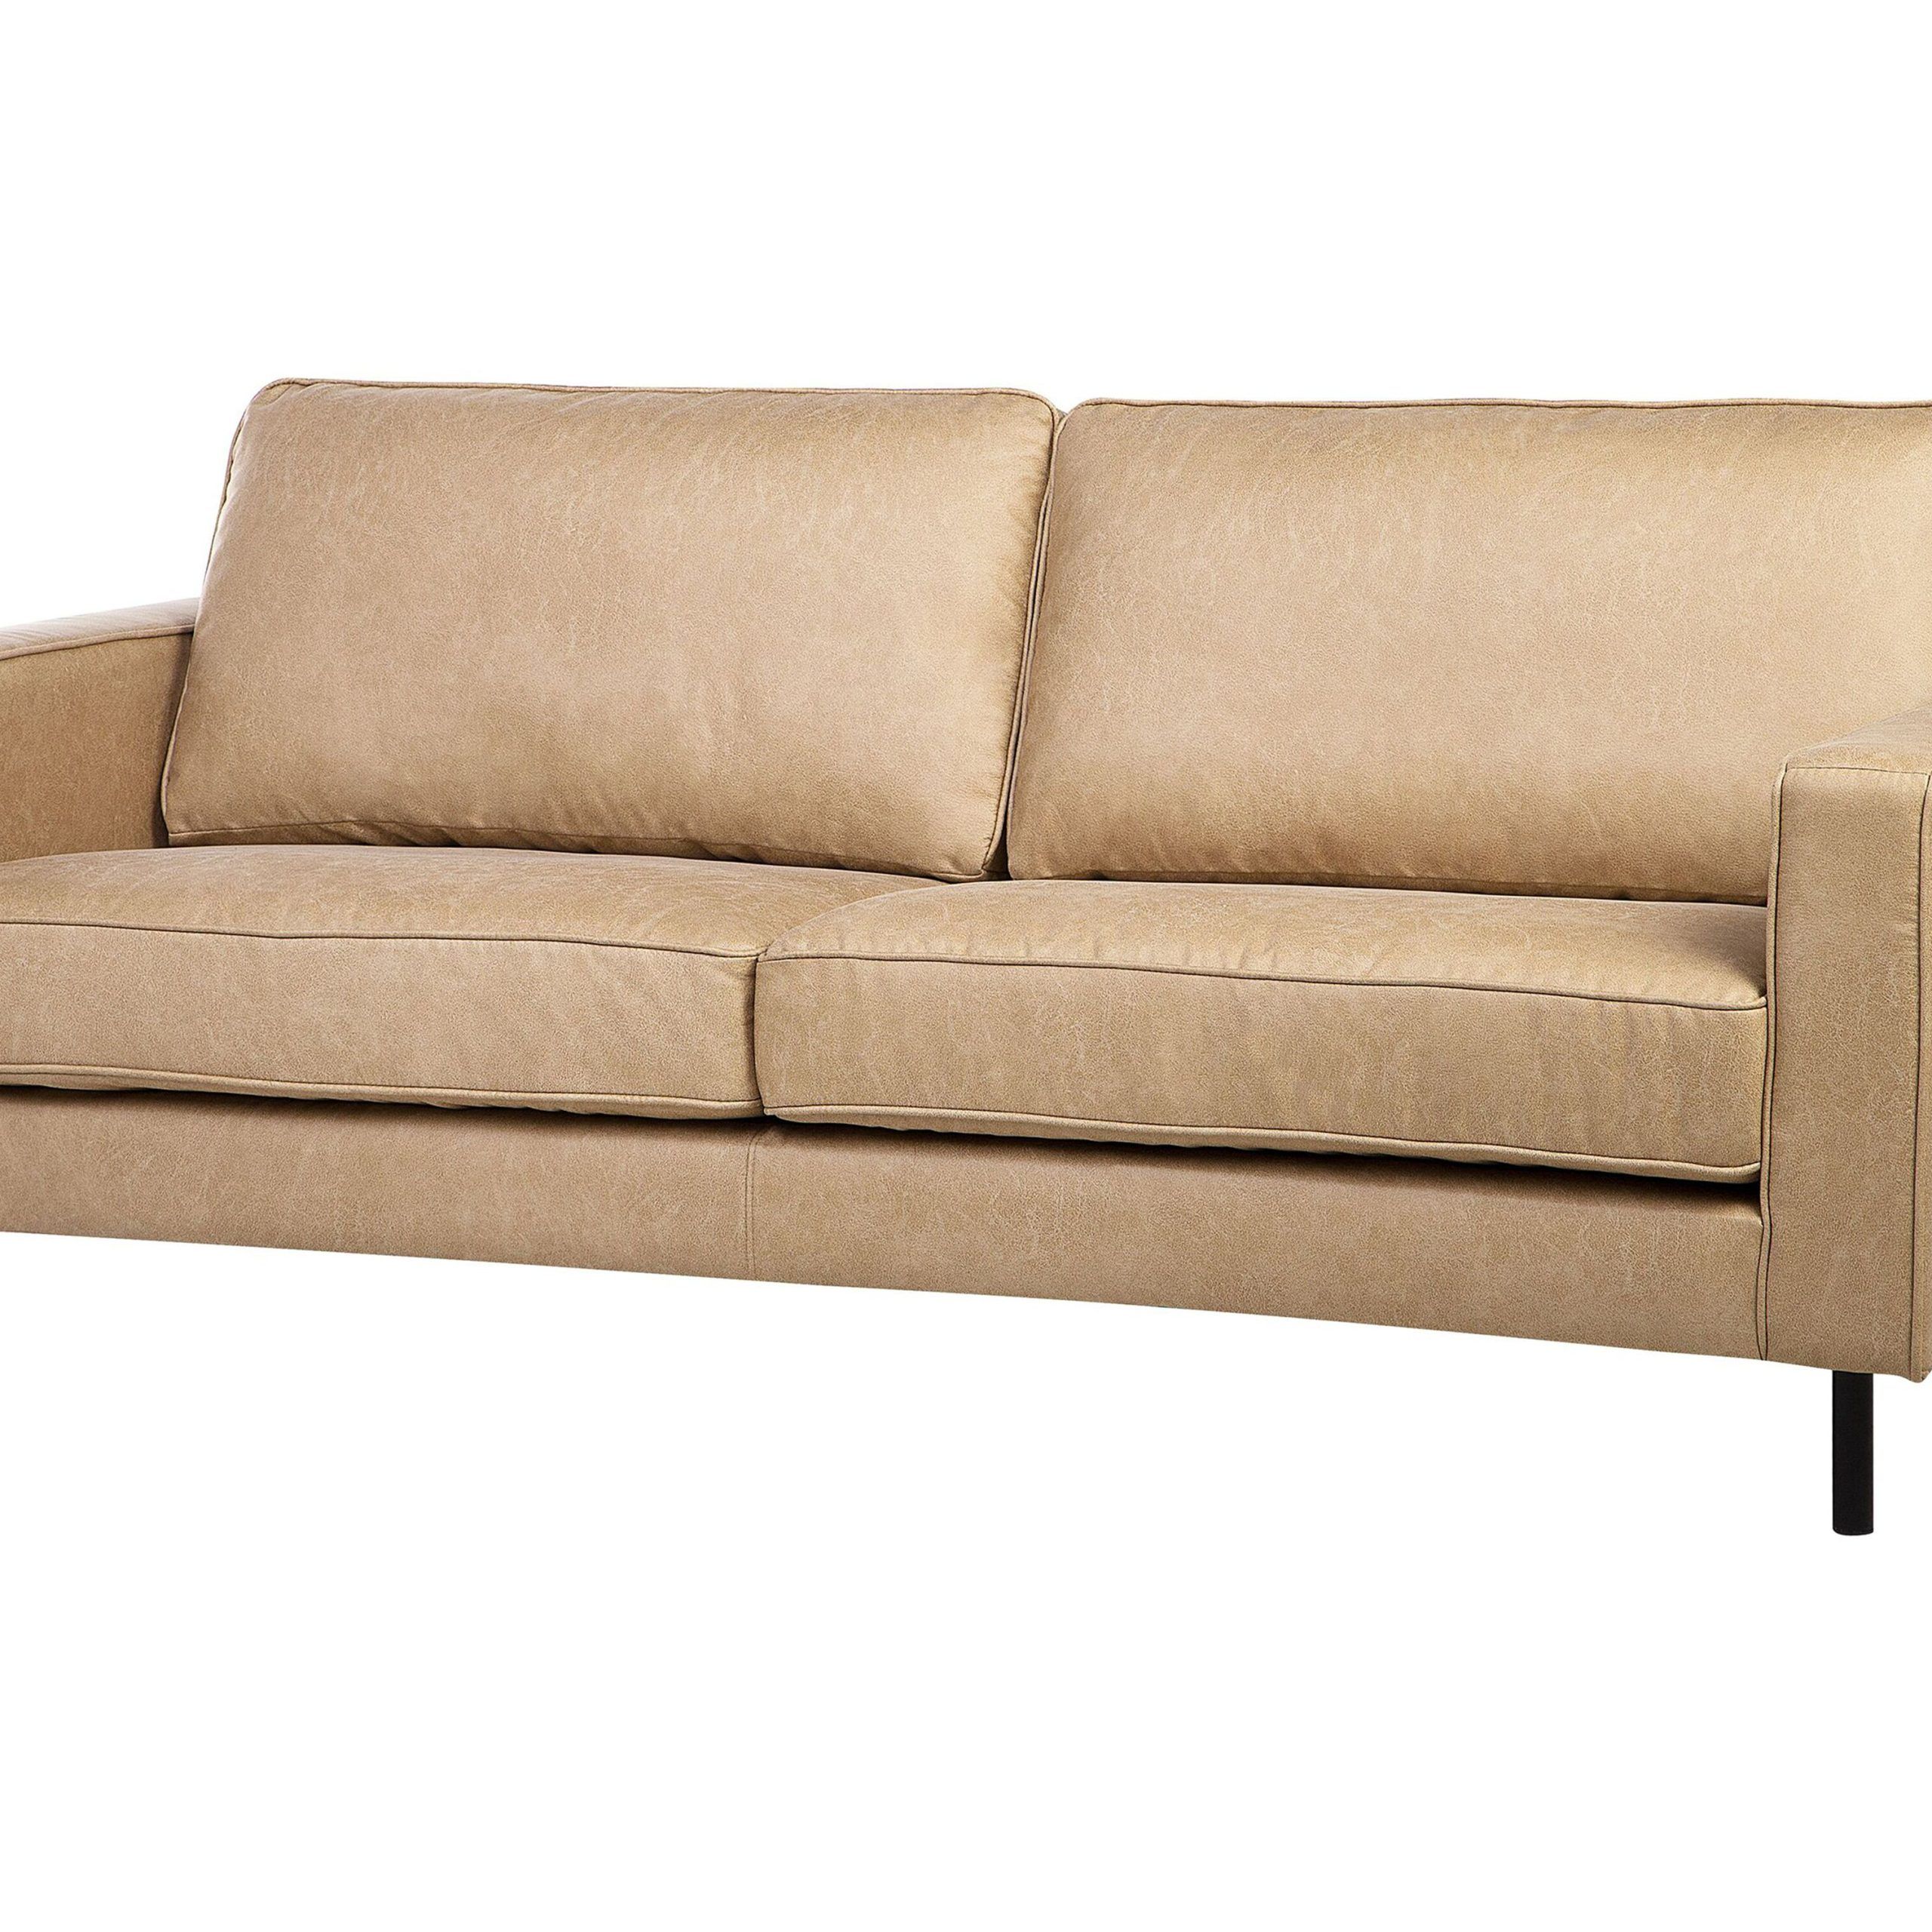 3 Seater Faux Leather Sofa Beige Savalen | Beliani.co.uk Throughout Traditional 3 Seater Faux Leather Sofas (Gallery 8 of 20)